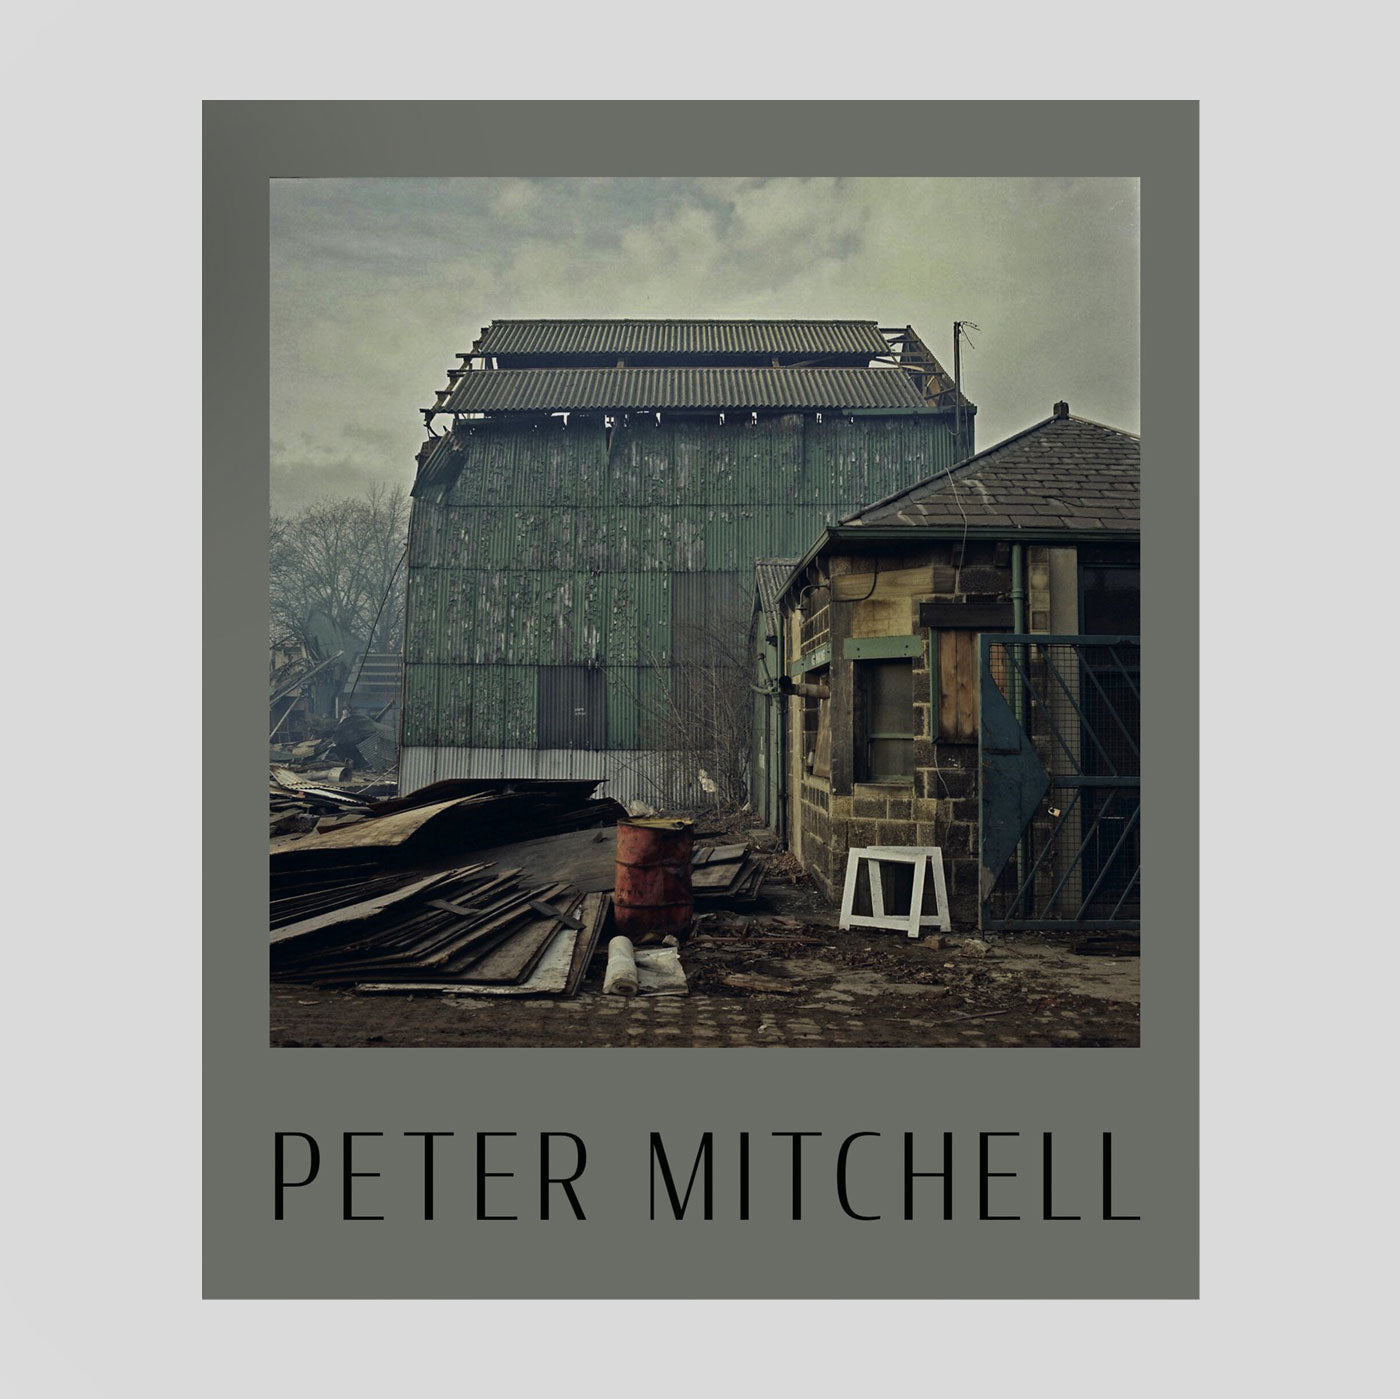 Peter Mitchell - 'Early Sunday Morning'  - New Book & Exhibition June 19-July 31 2020